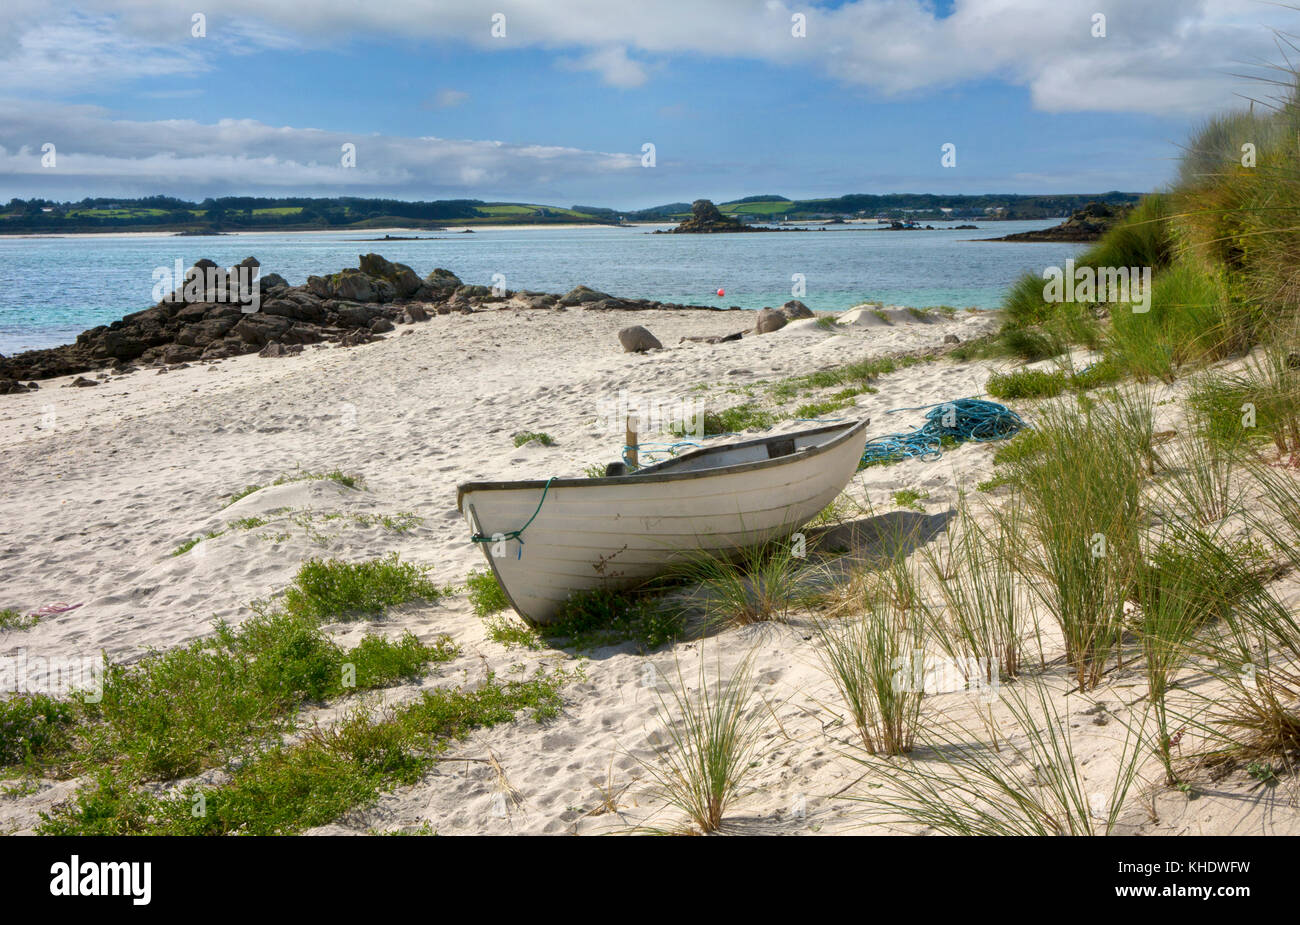 Kleines Ruderboot am Strand, Lawrence Bay, St Martin's, Scilly Inseln Stockfoto